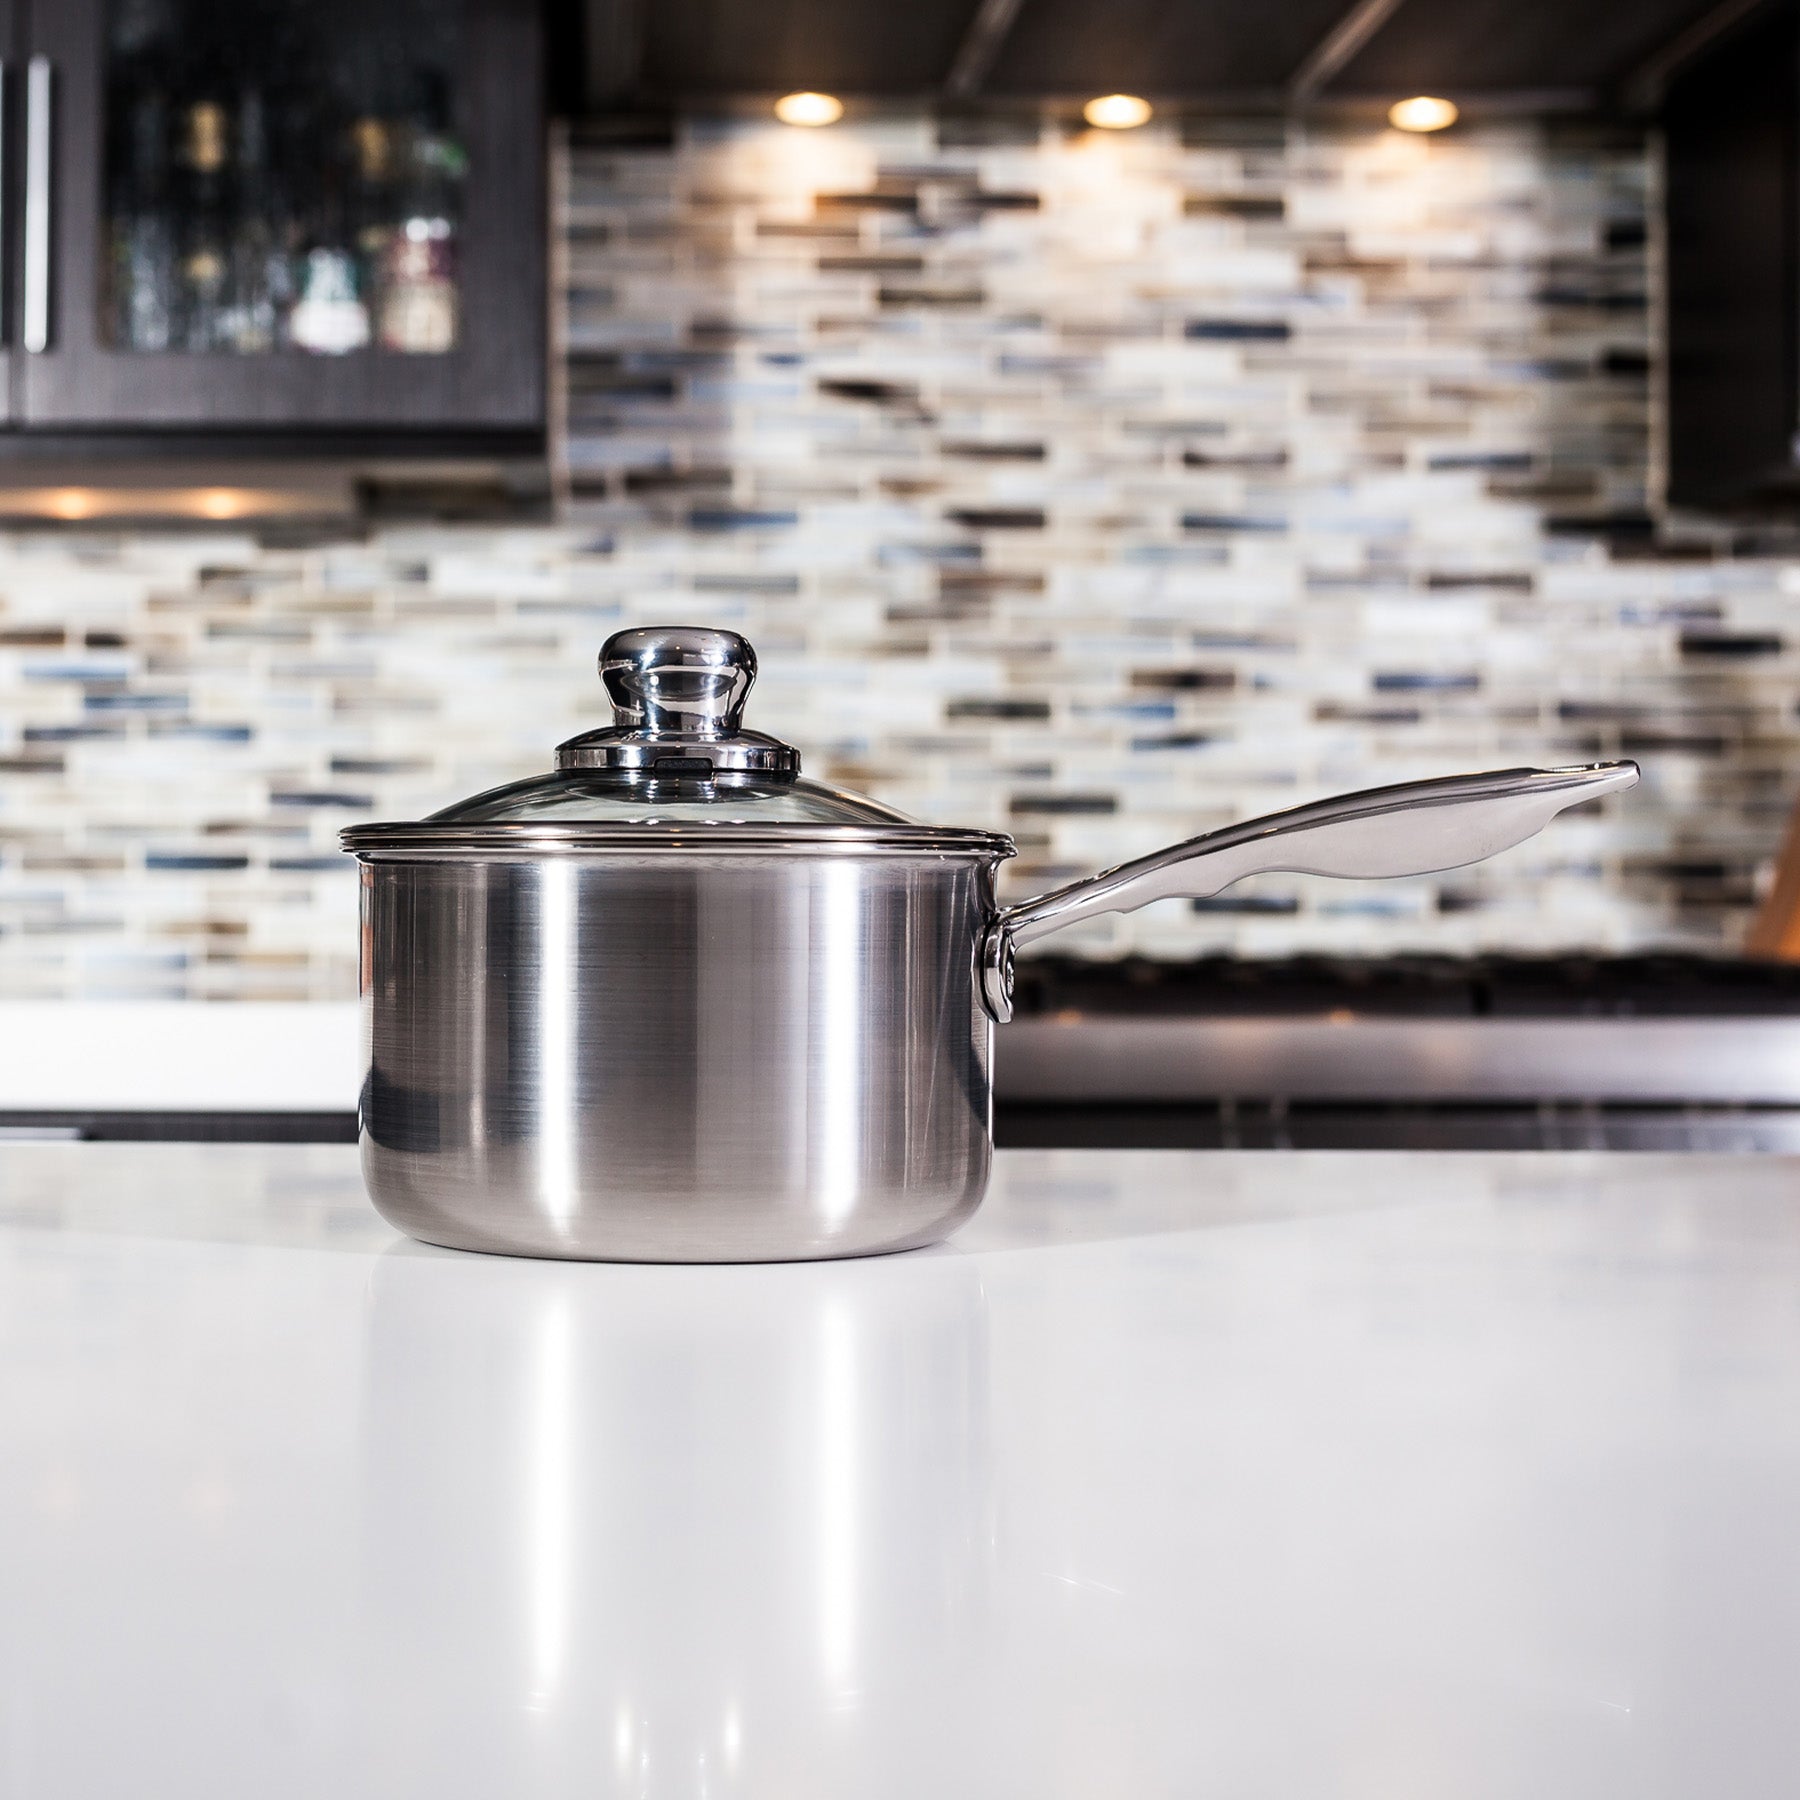 Premium Clad Saucepan with Glass Lid - Induction in use on kitchen counter